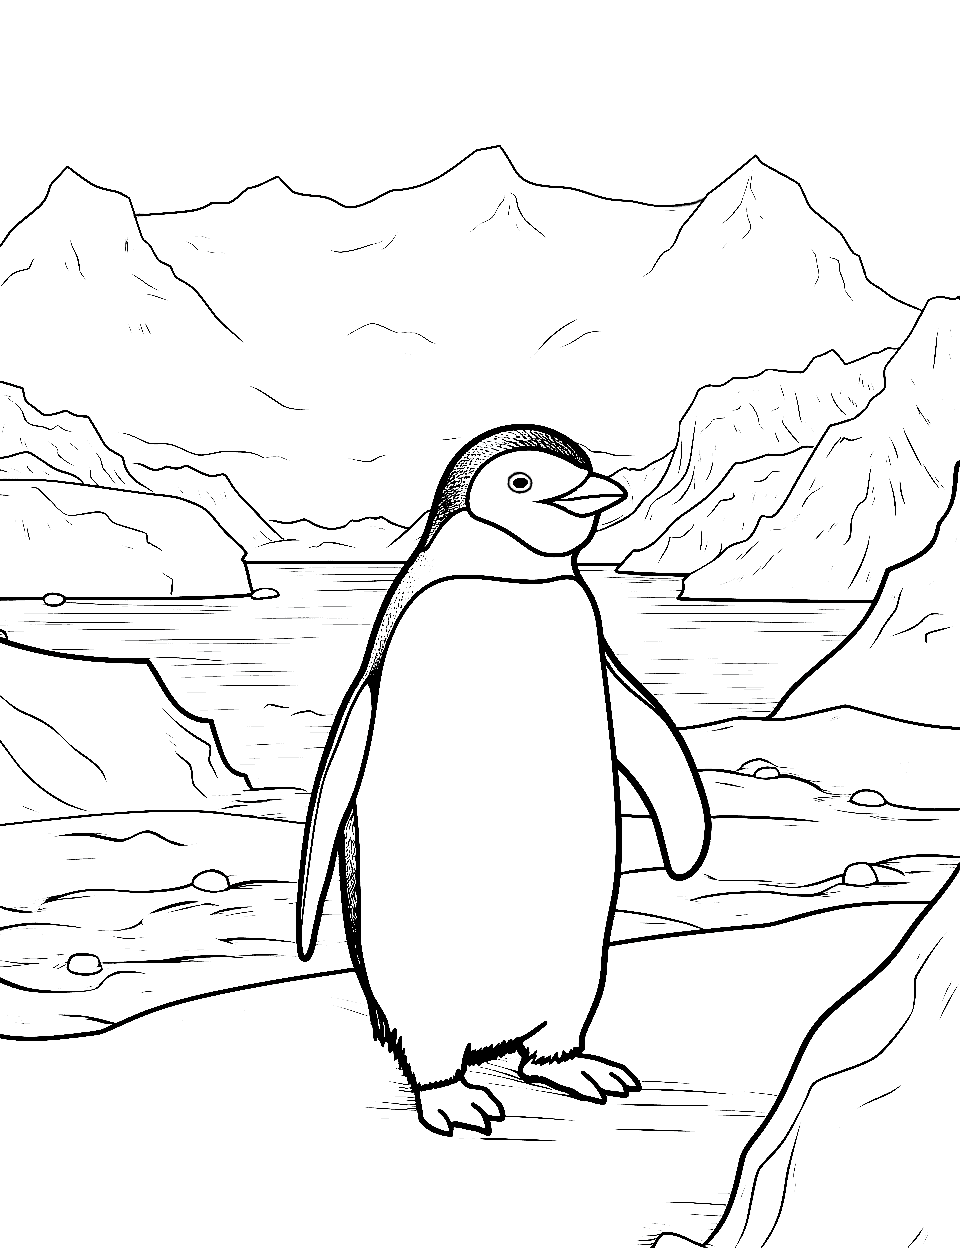 Antarctica Expedition Coloring Page - A penguin near an iceberg, with the vast Antarctic landscape behind.